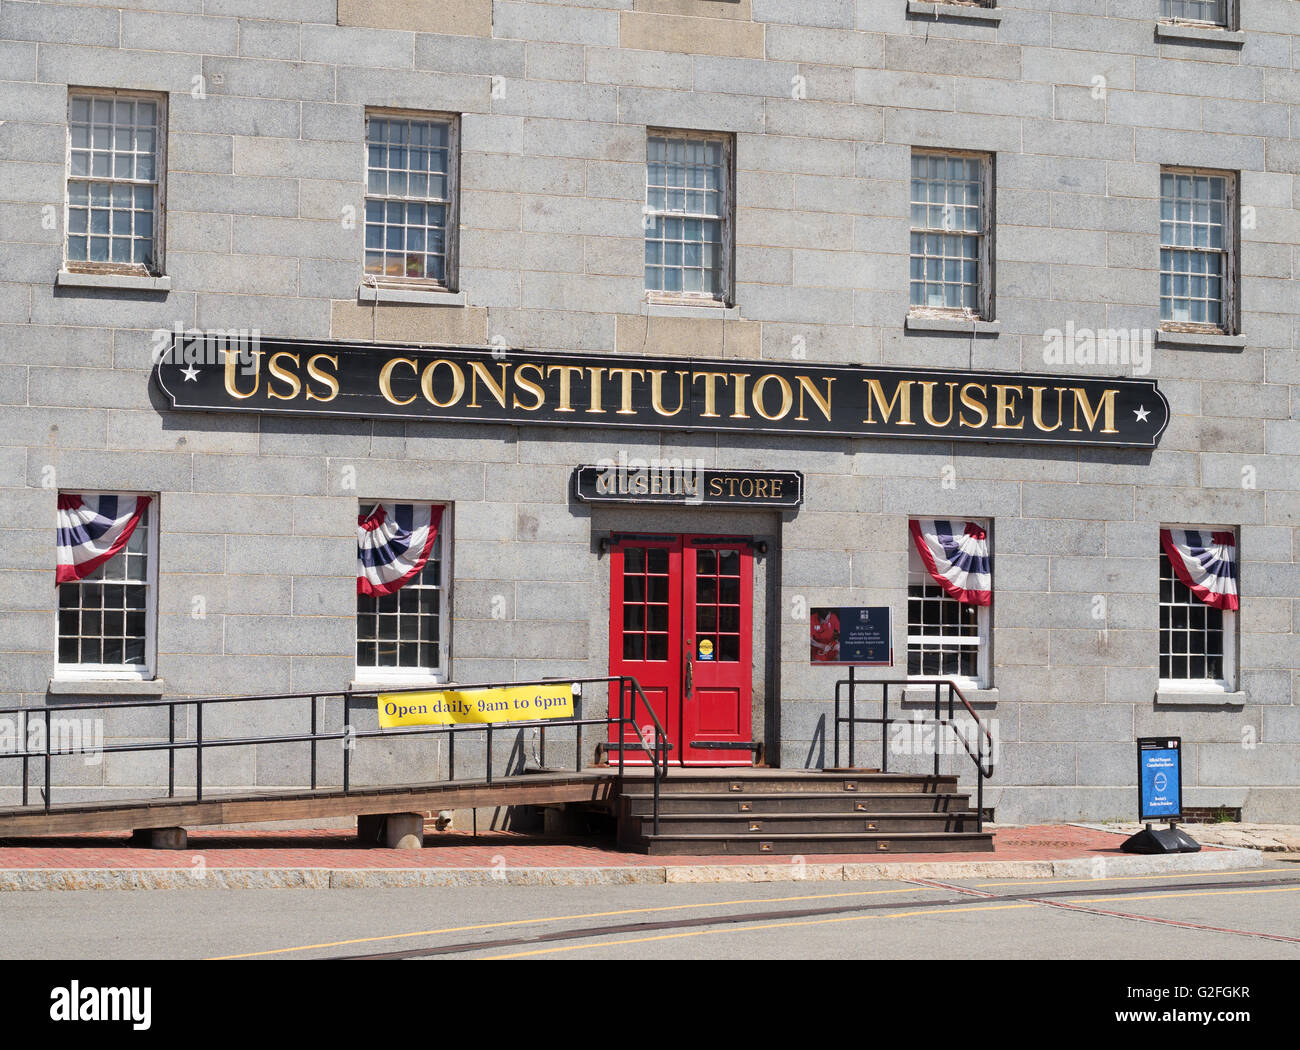 USS Constitution Museum building, Charlestown Navy Yard, Boston, Massachusetts, USA Banque D'Images